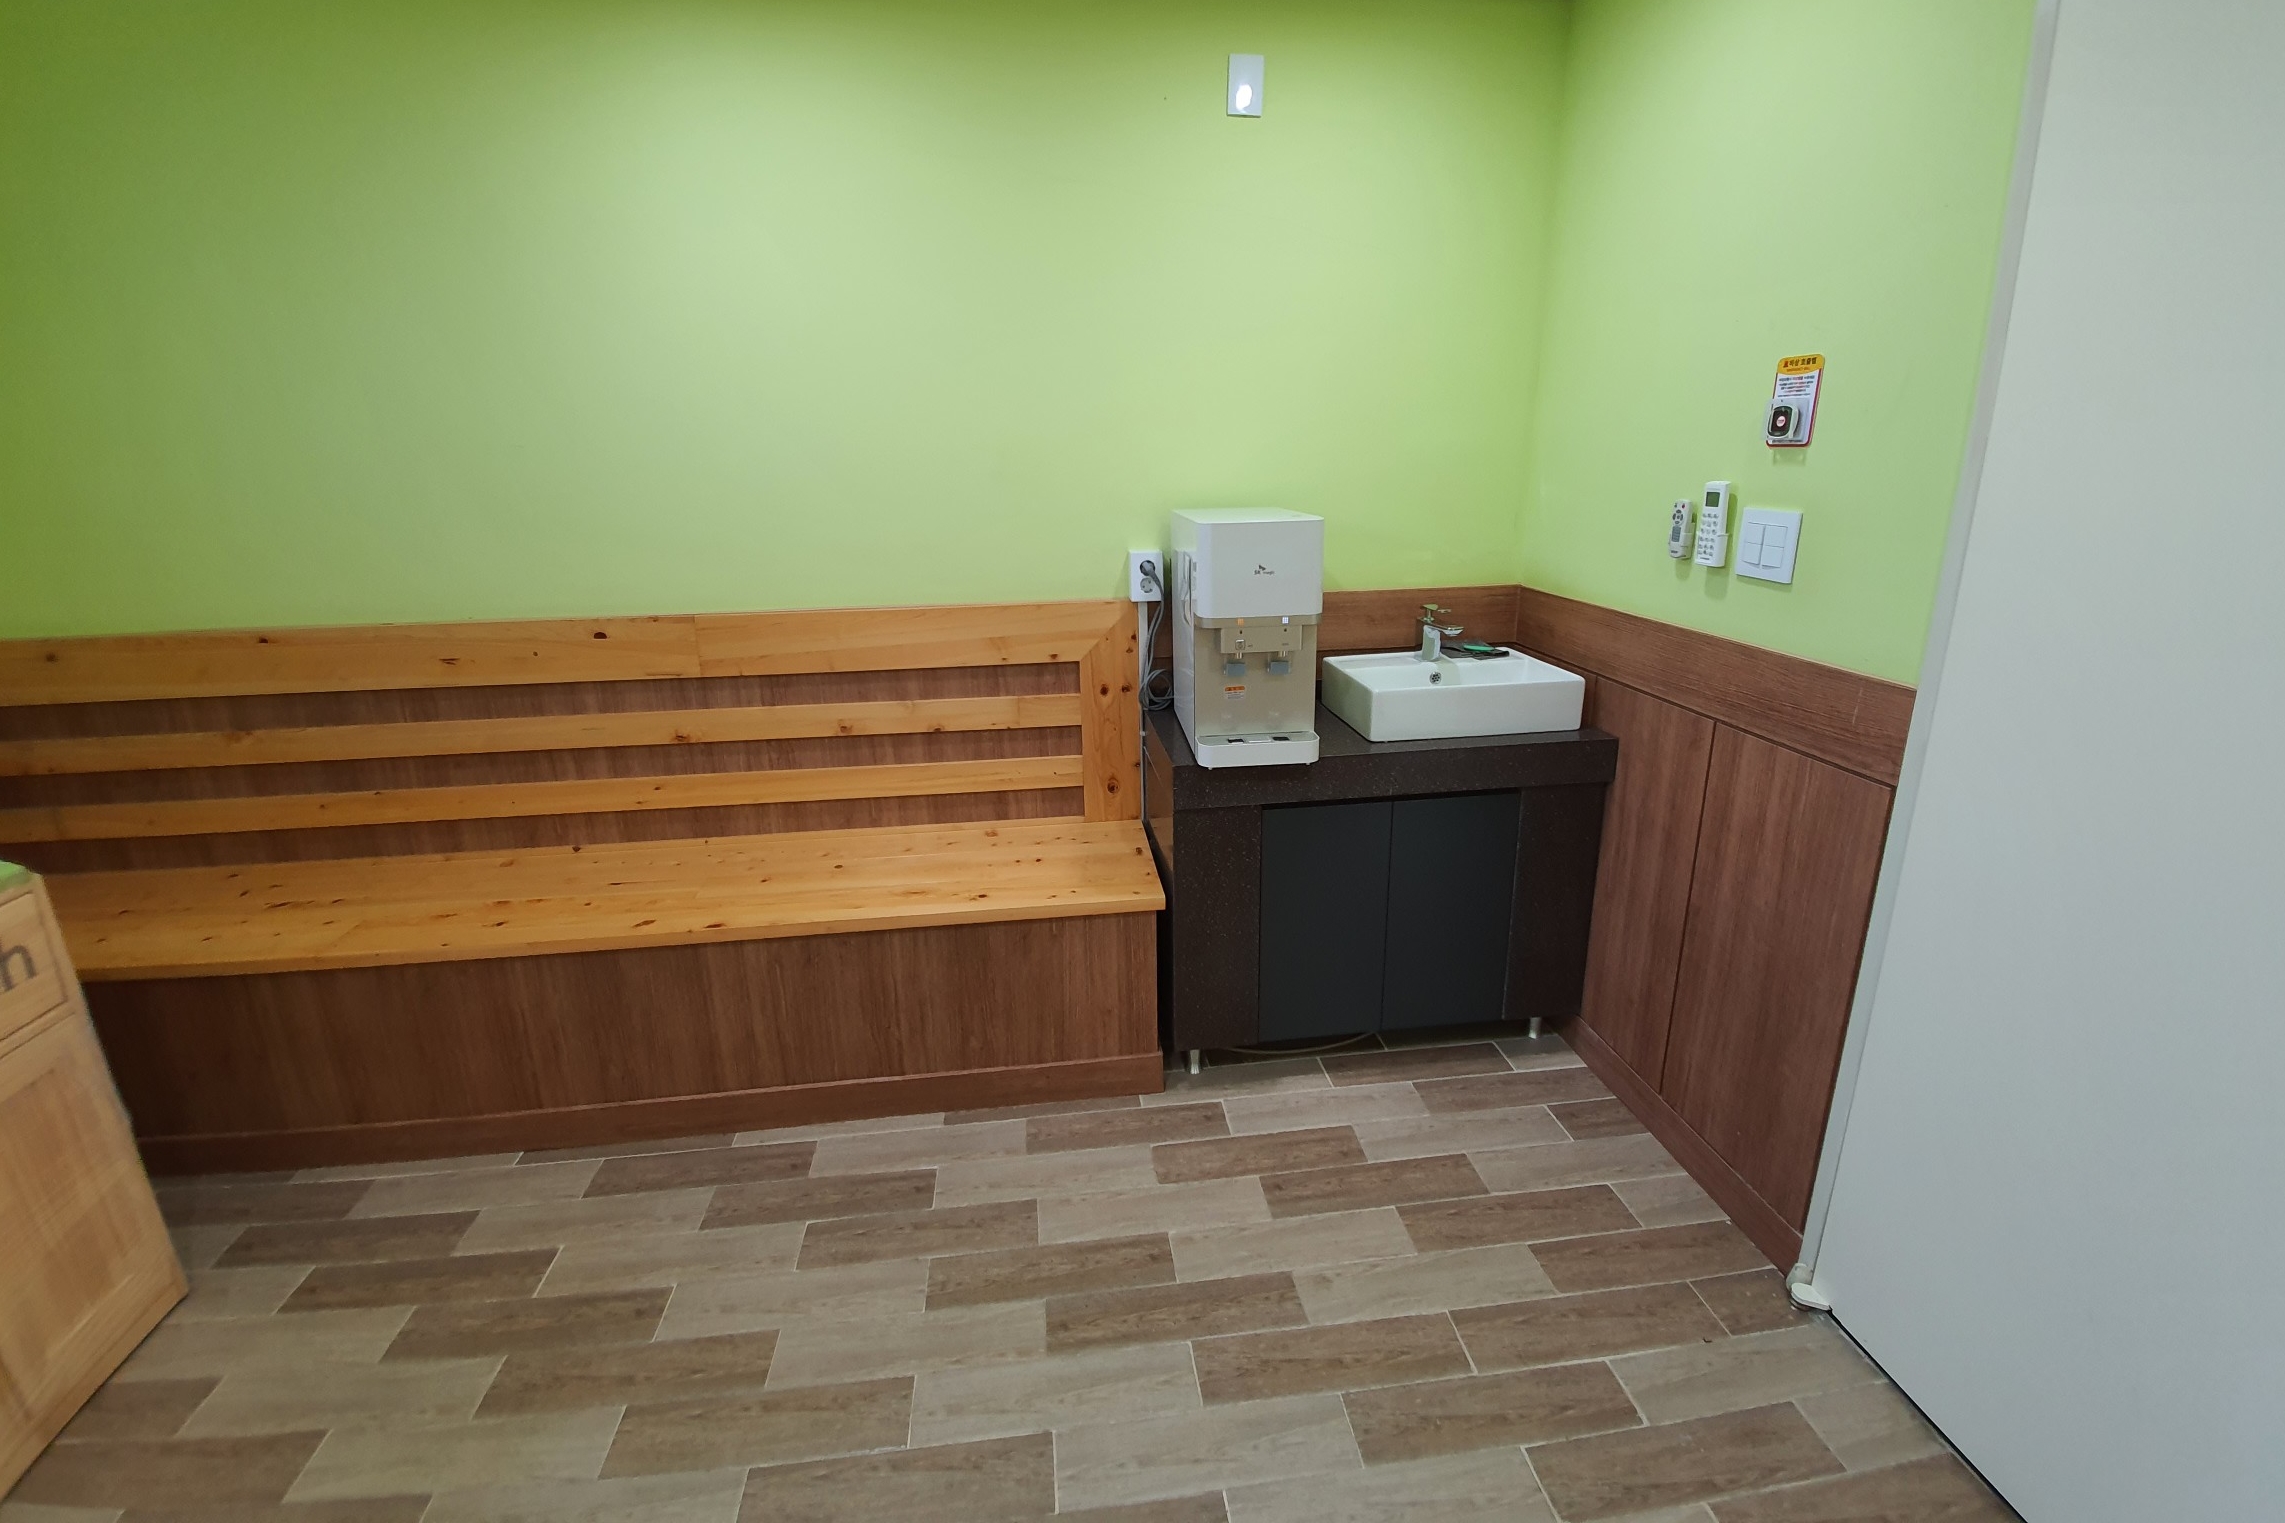 Lounge for families with children0 : Nursing room of Pureun Arboretum where provides a water purifier and sinks
